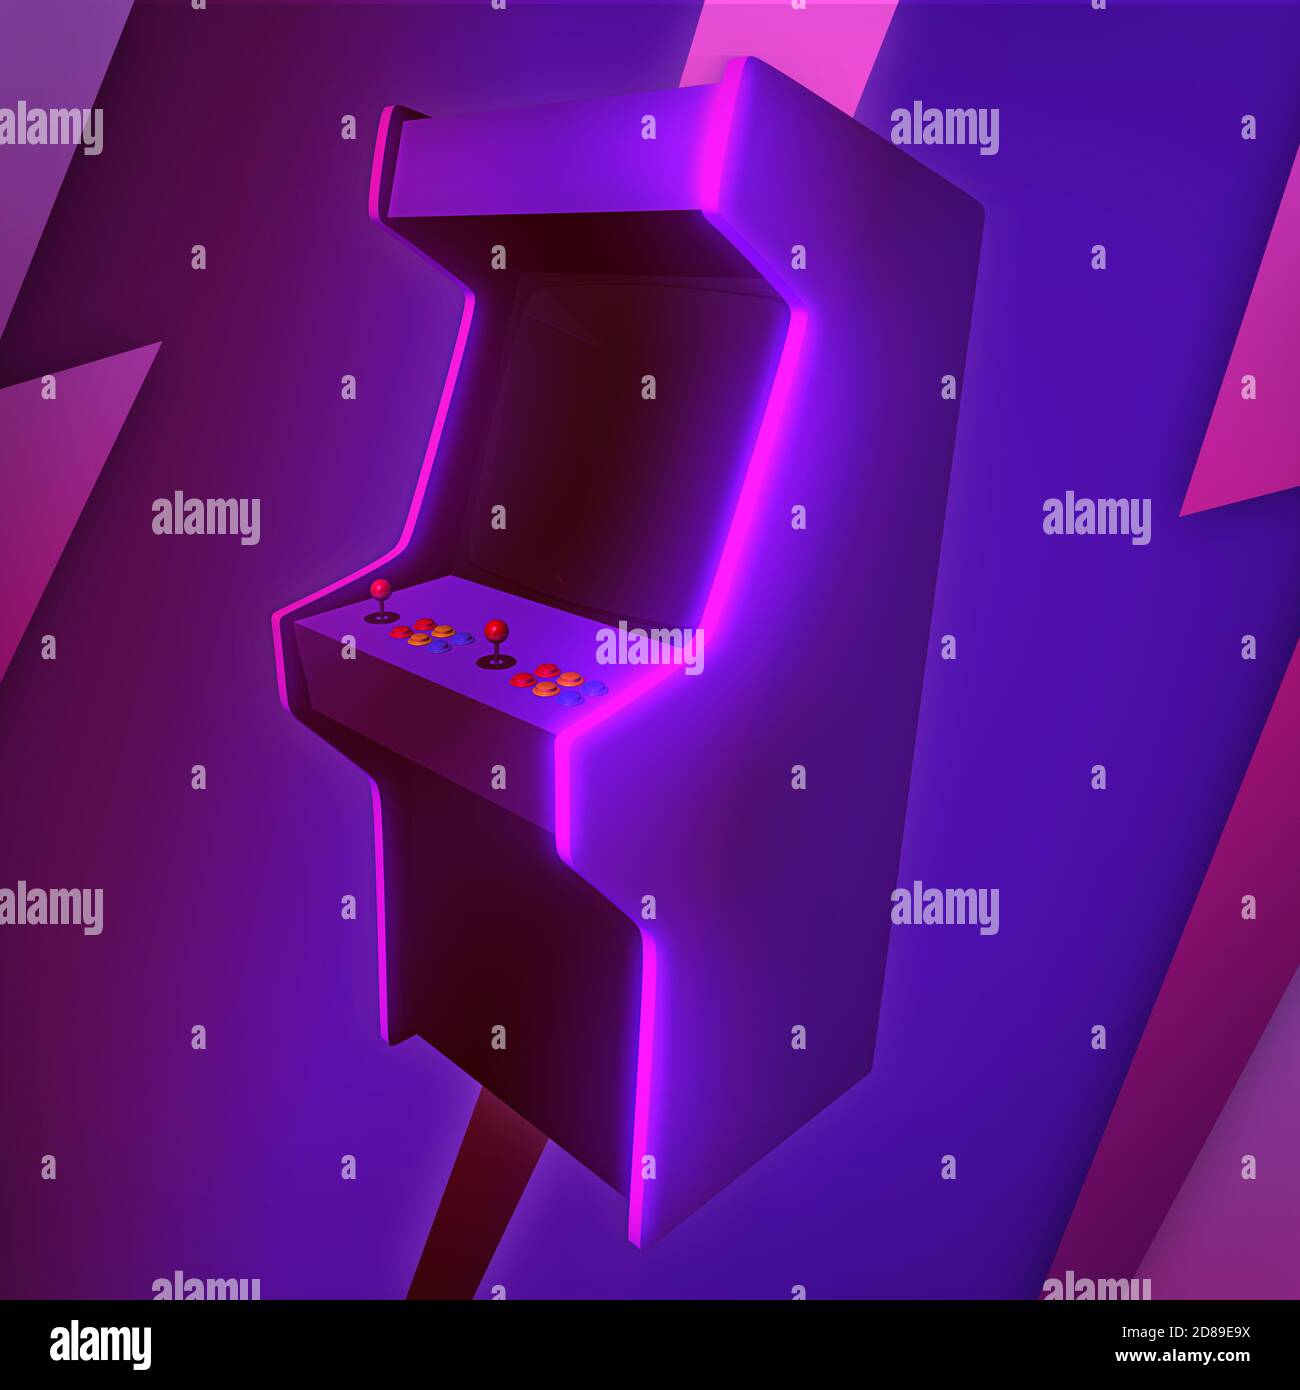 Arcade machine cabinet 3D illustration. A symbol of retro gaming in a new retro wave, stylish look Stock Photo